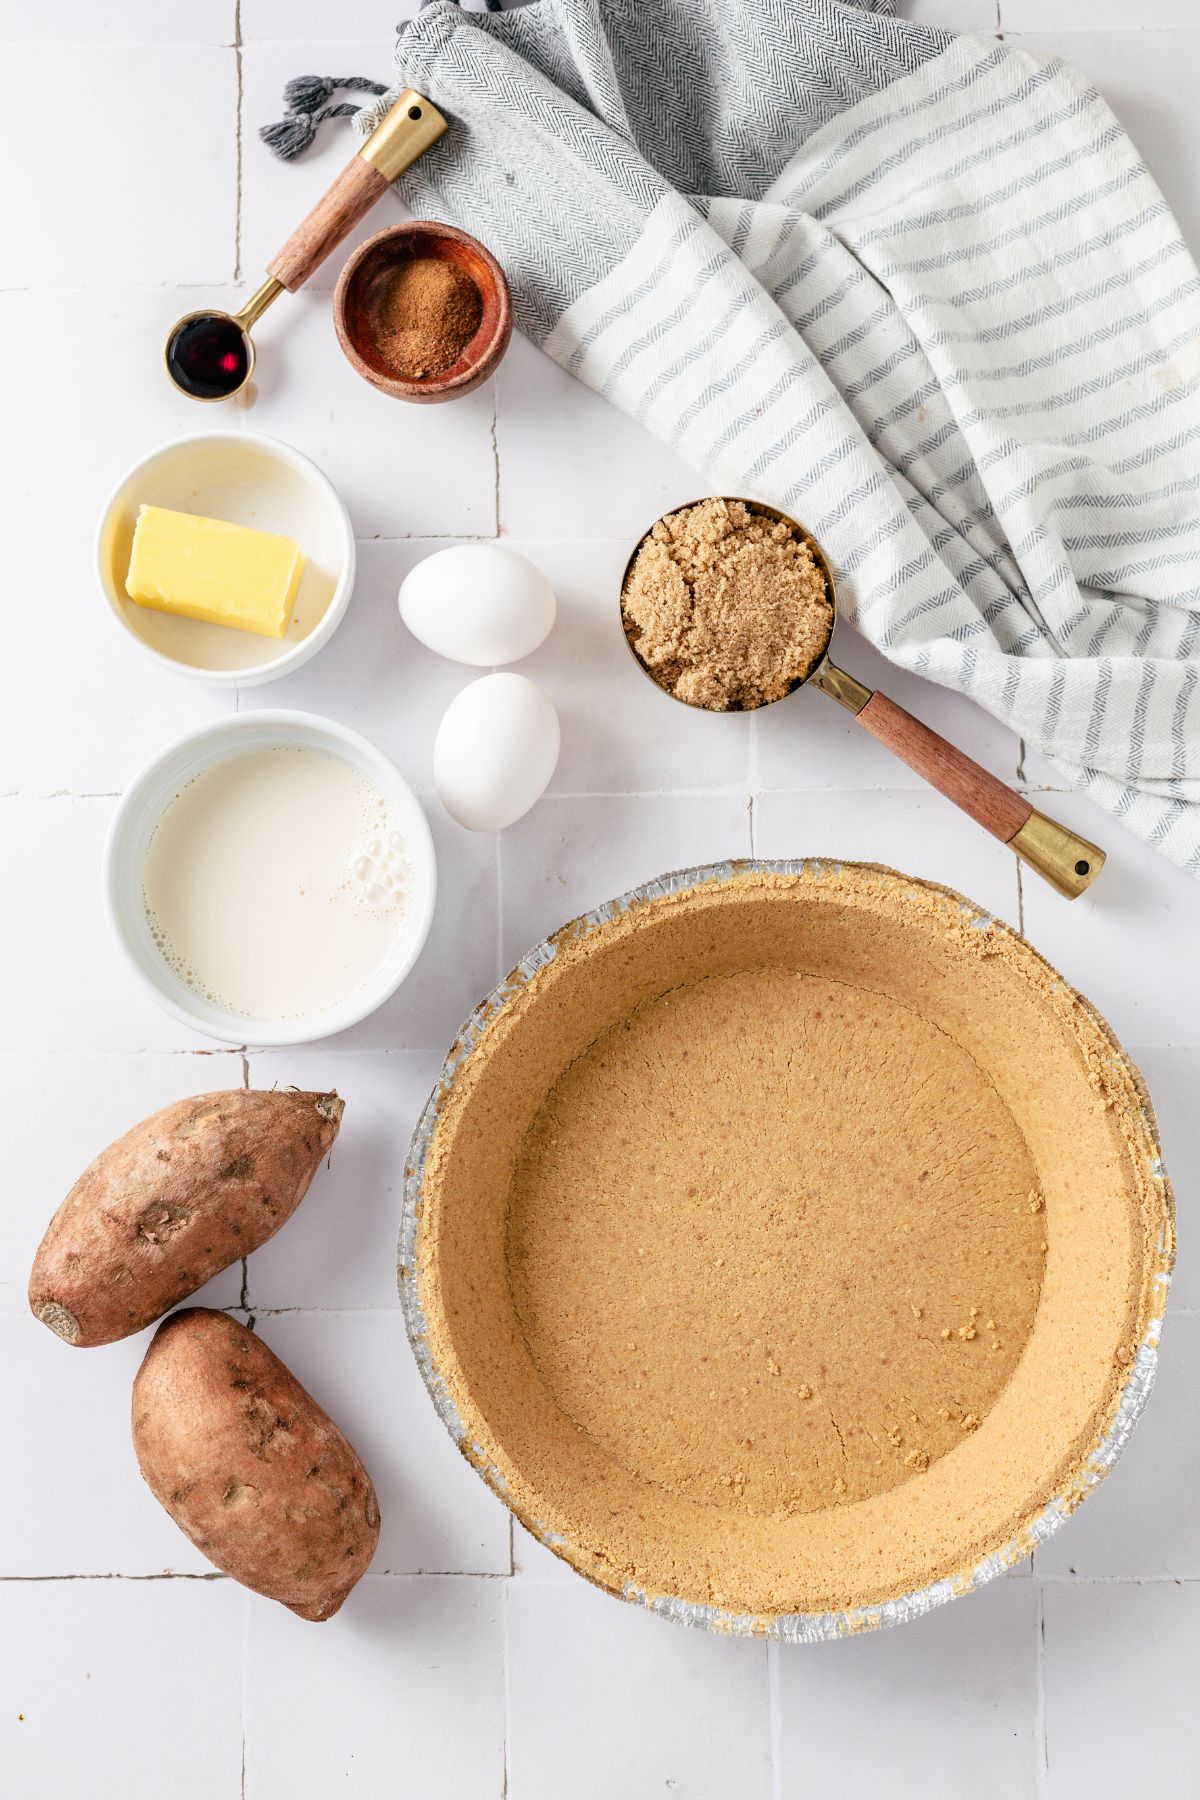 Graham cracker crust, Sweet potatoes, Butter, Brown sugar, Evaporated milk, cinnamon and nutmeg in separate containers